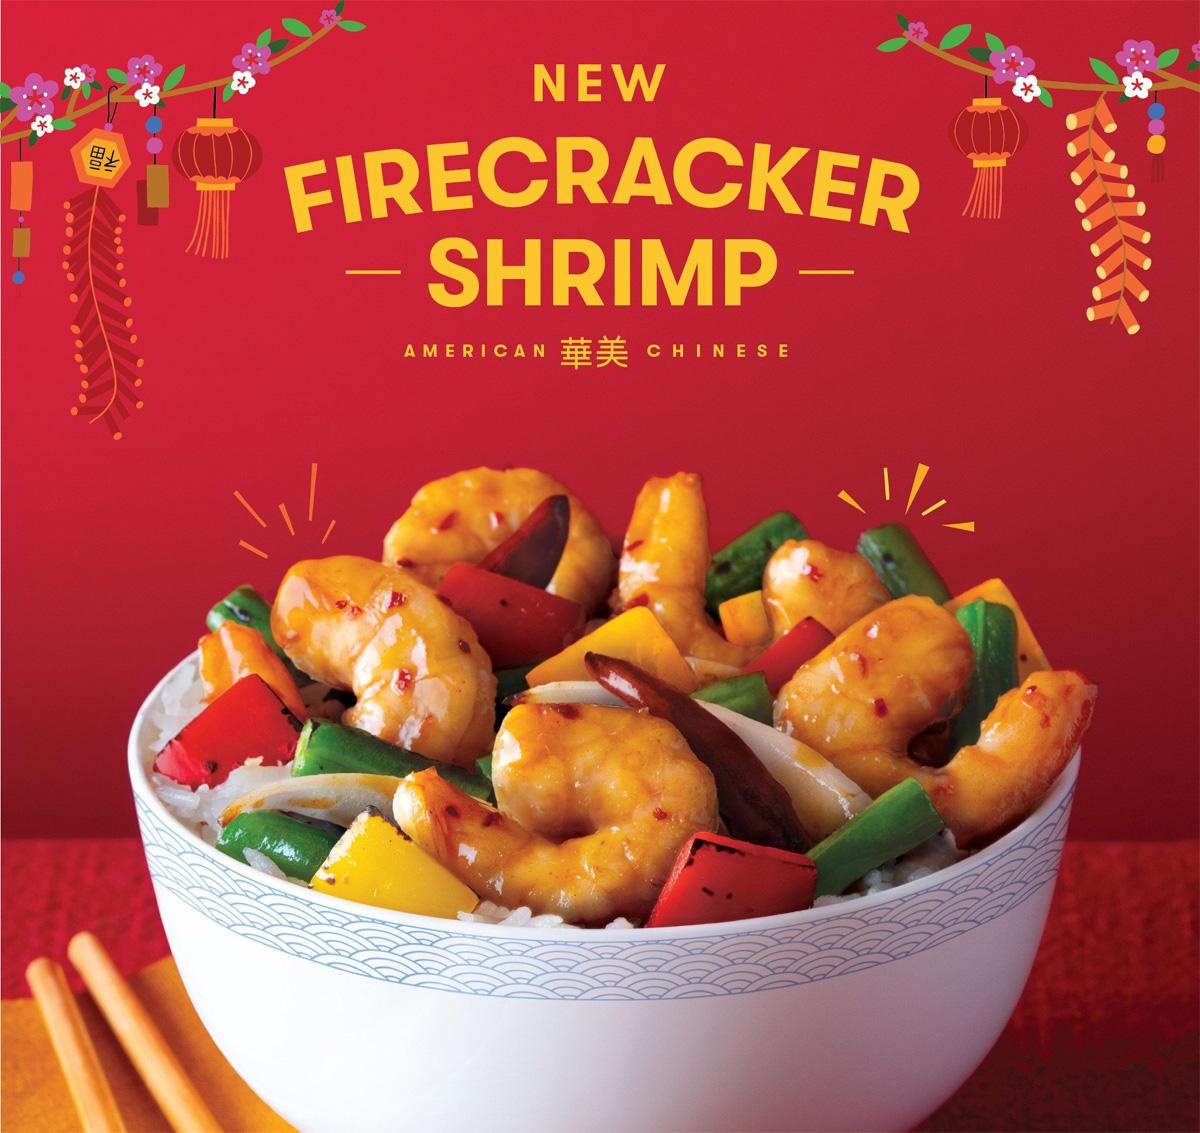 Free Panda Express Small Firecracker Shrimp Entree with 2-Item Plate Purchase